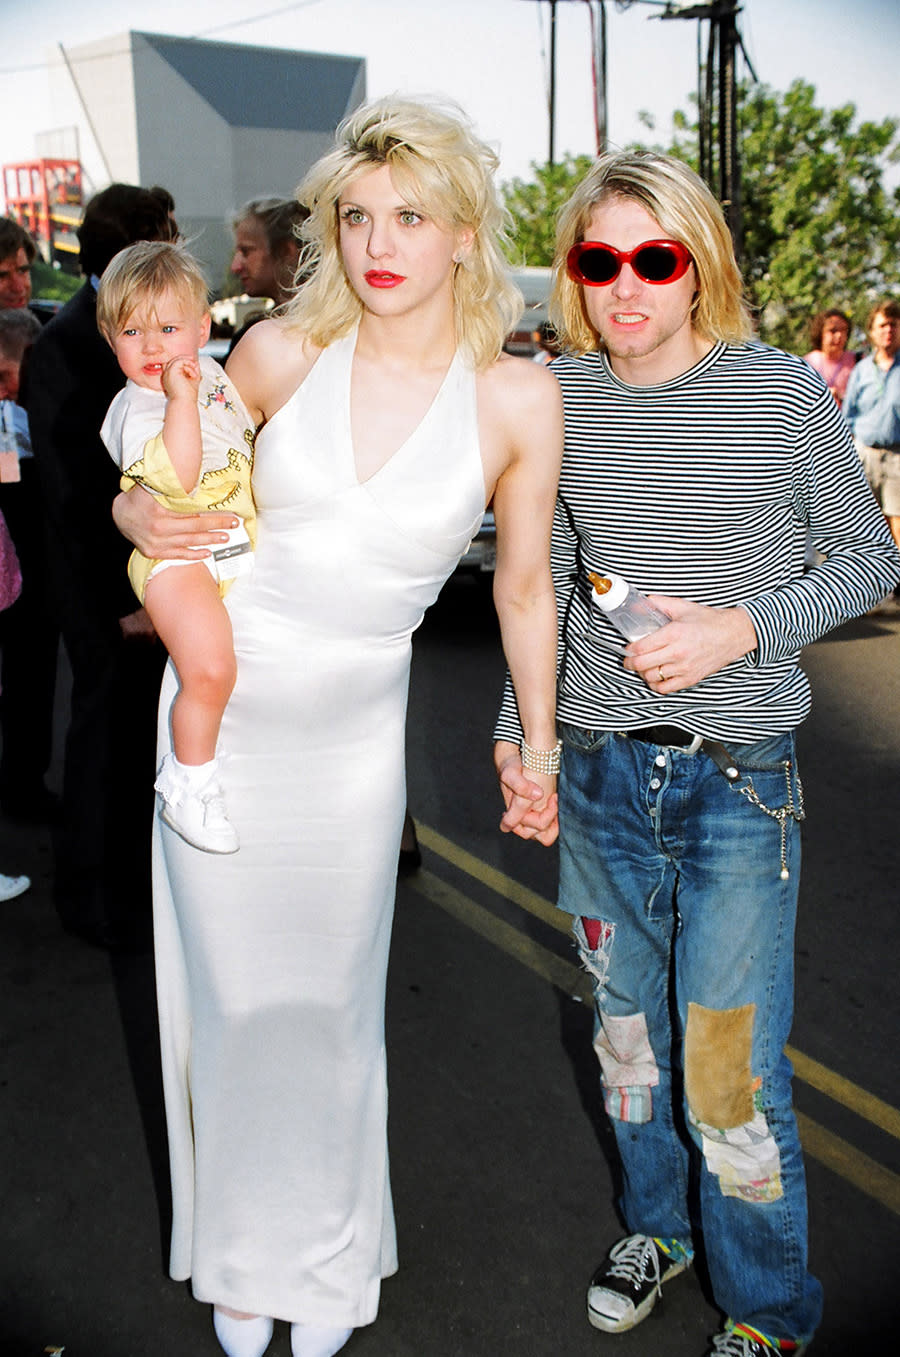 Kurt Cobain wearing patchwork denim with Courtney Love, who is carrying Frances Bean Cobain, at the 1993 MTV Video Music Awards.